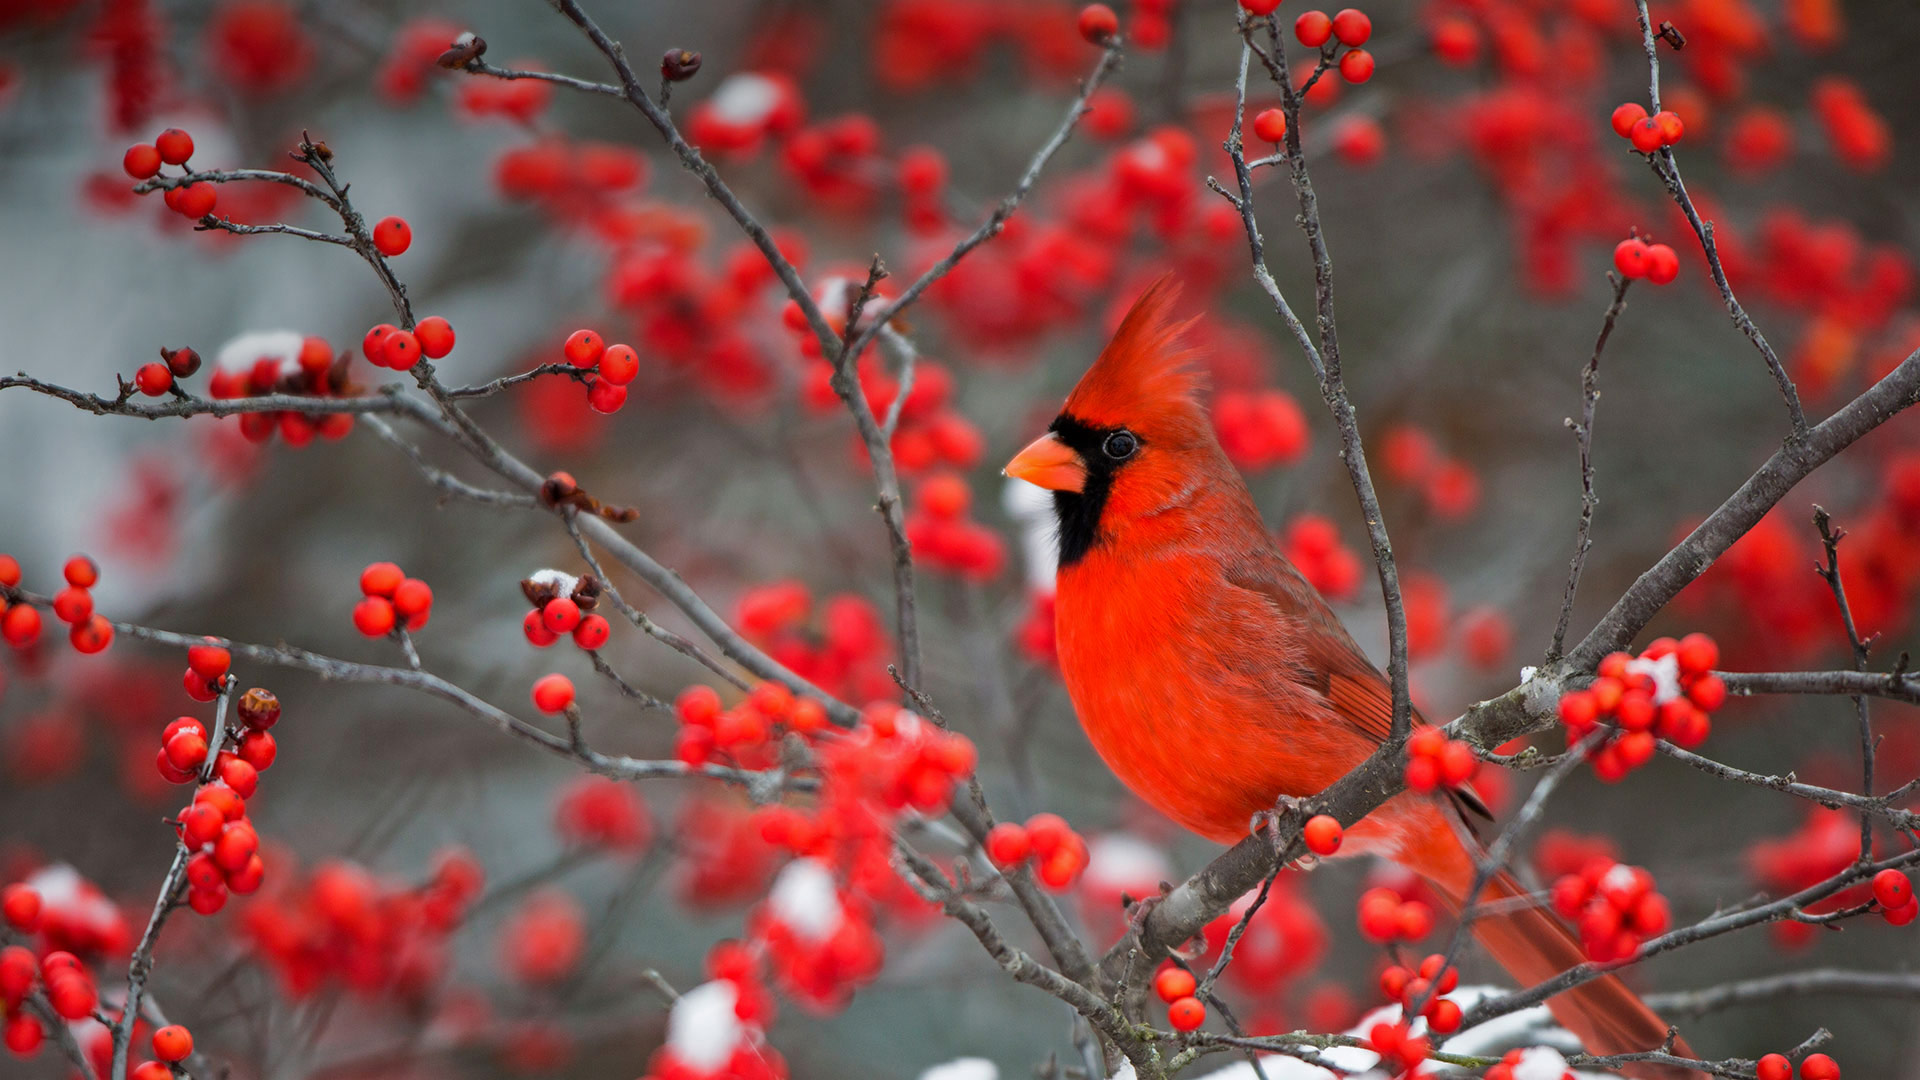 A northern cardinal perched in a common winterberry bush in Marion County, Illinois - Richard and Susan Day/Danita Delimont)